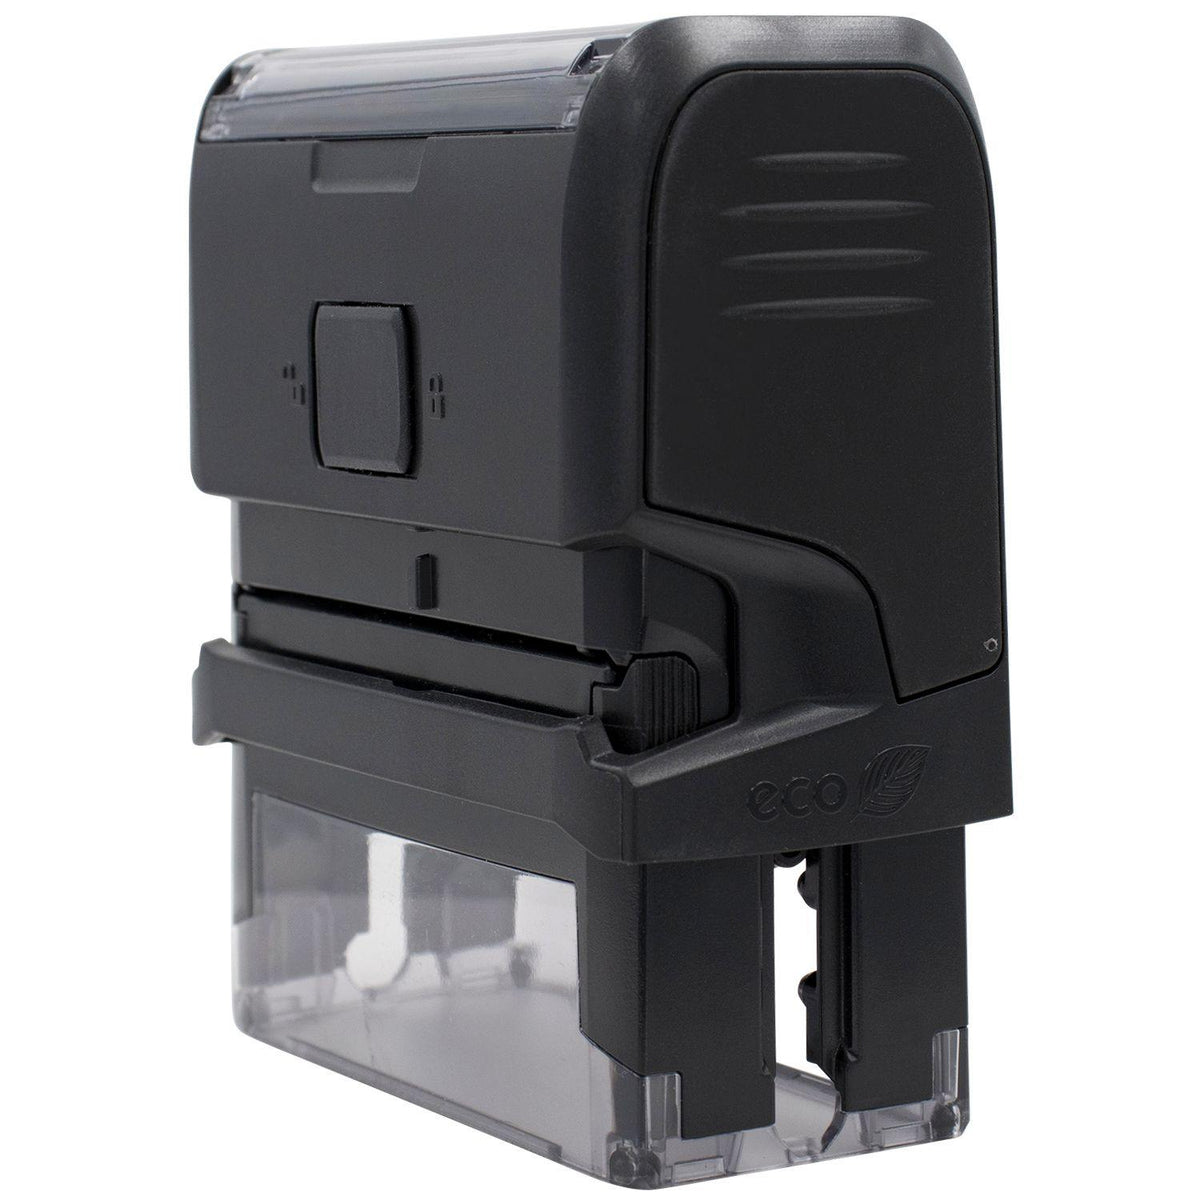 Self Inking Air Mail Stamp - Engineer Seal Stamps - Brand_Trodat, Impression Size_Small, Stamp Type_Self-Inking Stamp, Type of Use_Postal &amp; Mailing, Type of Use_Shipping &amp; Receiving